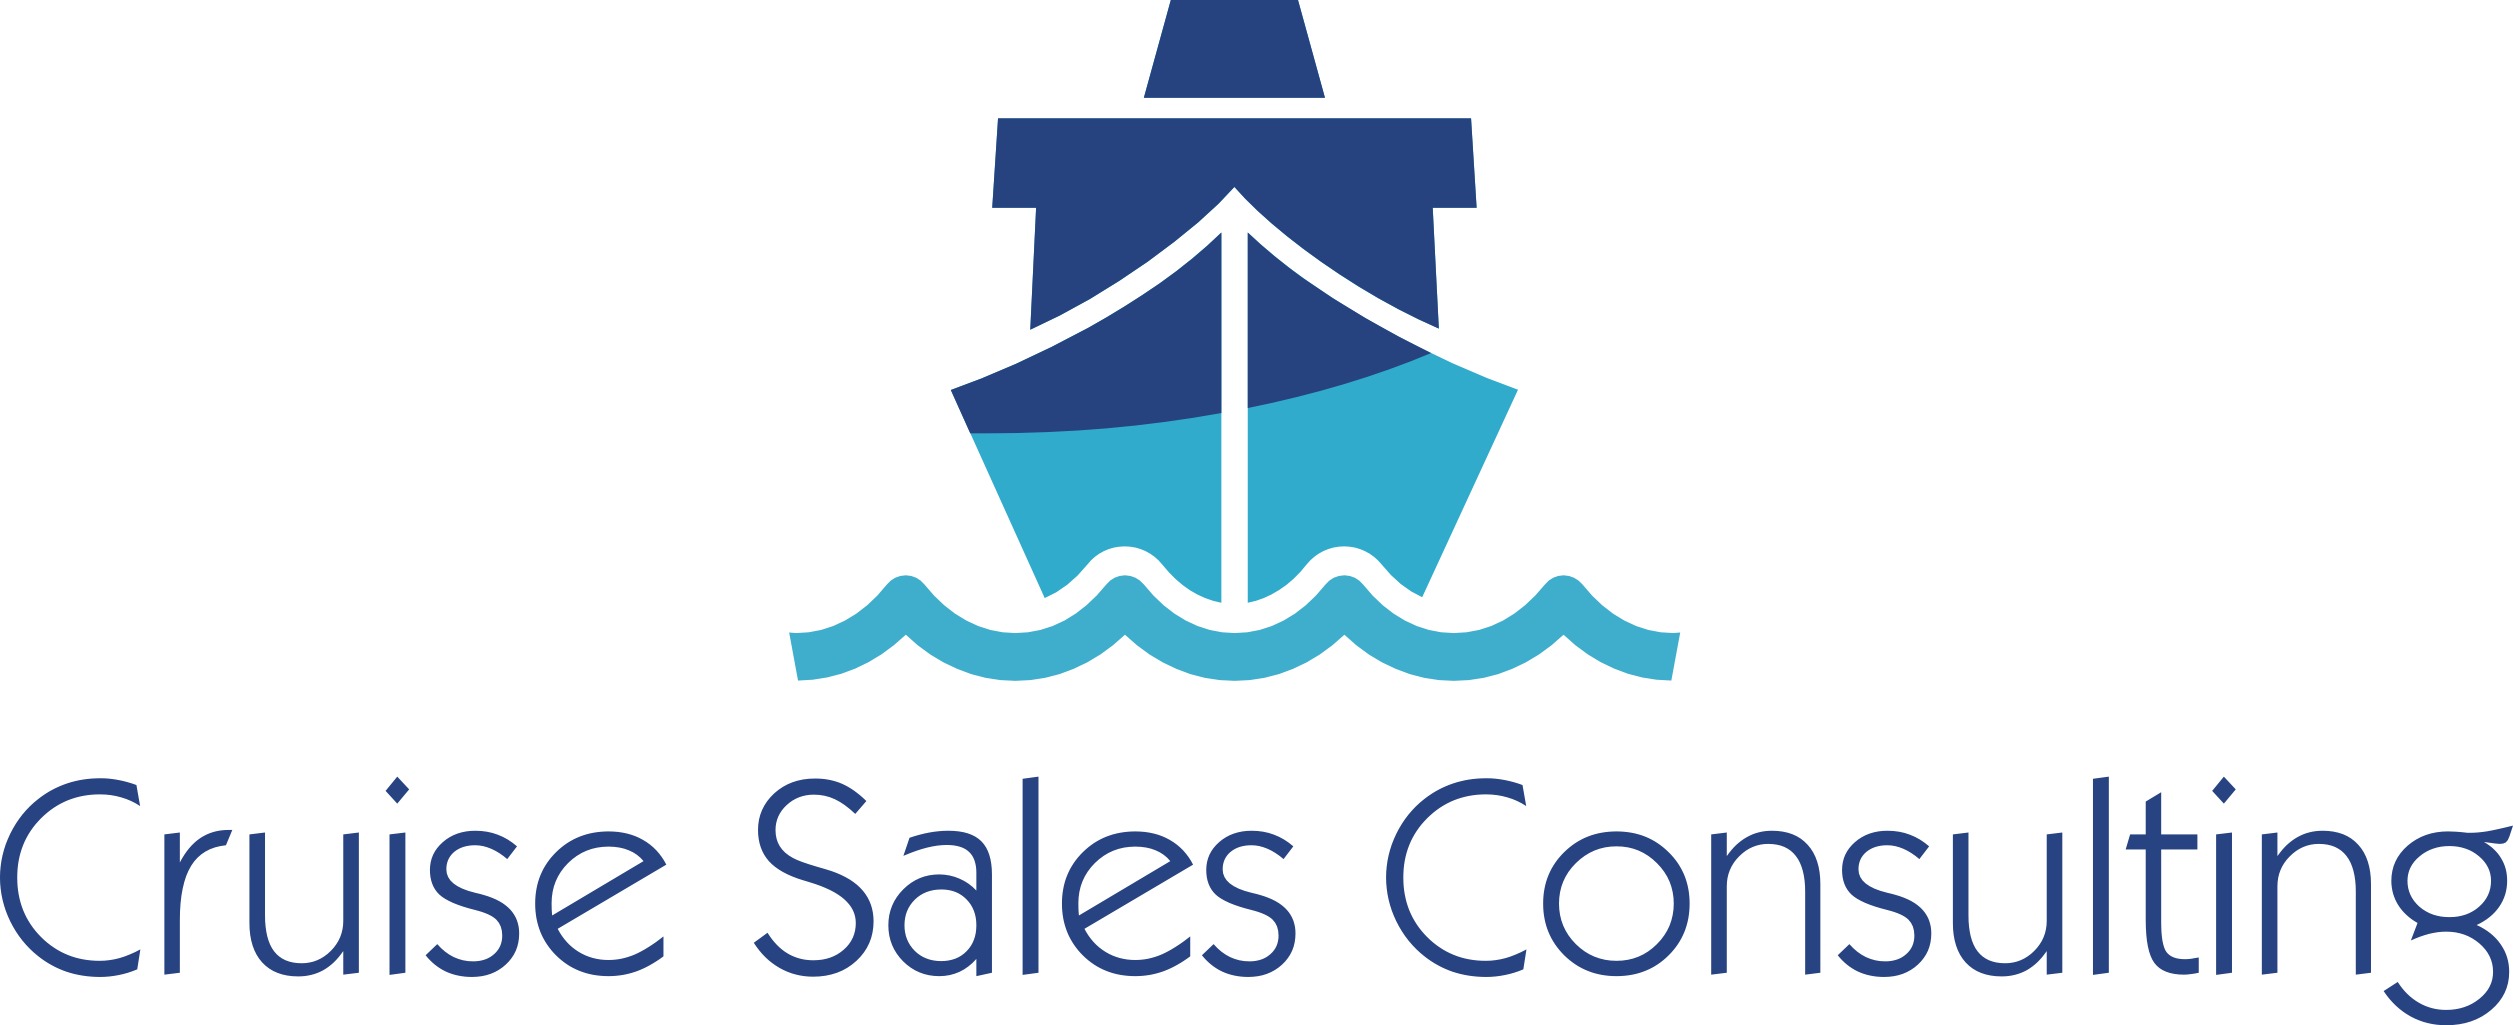 CRUISE SALES CONSULTING